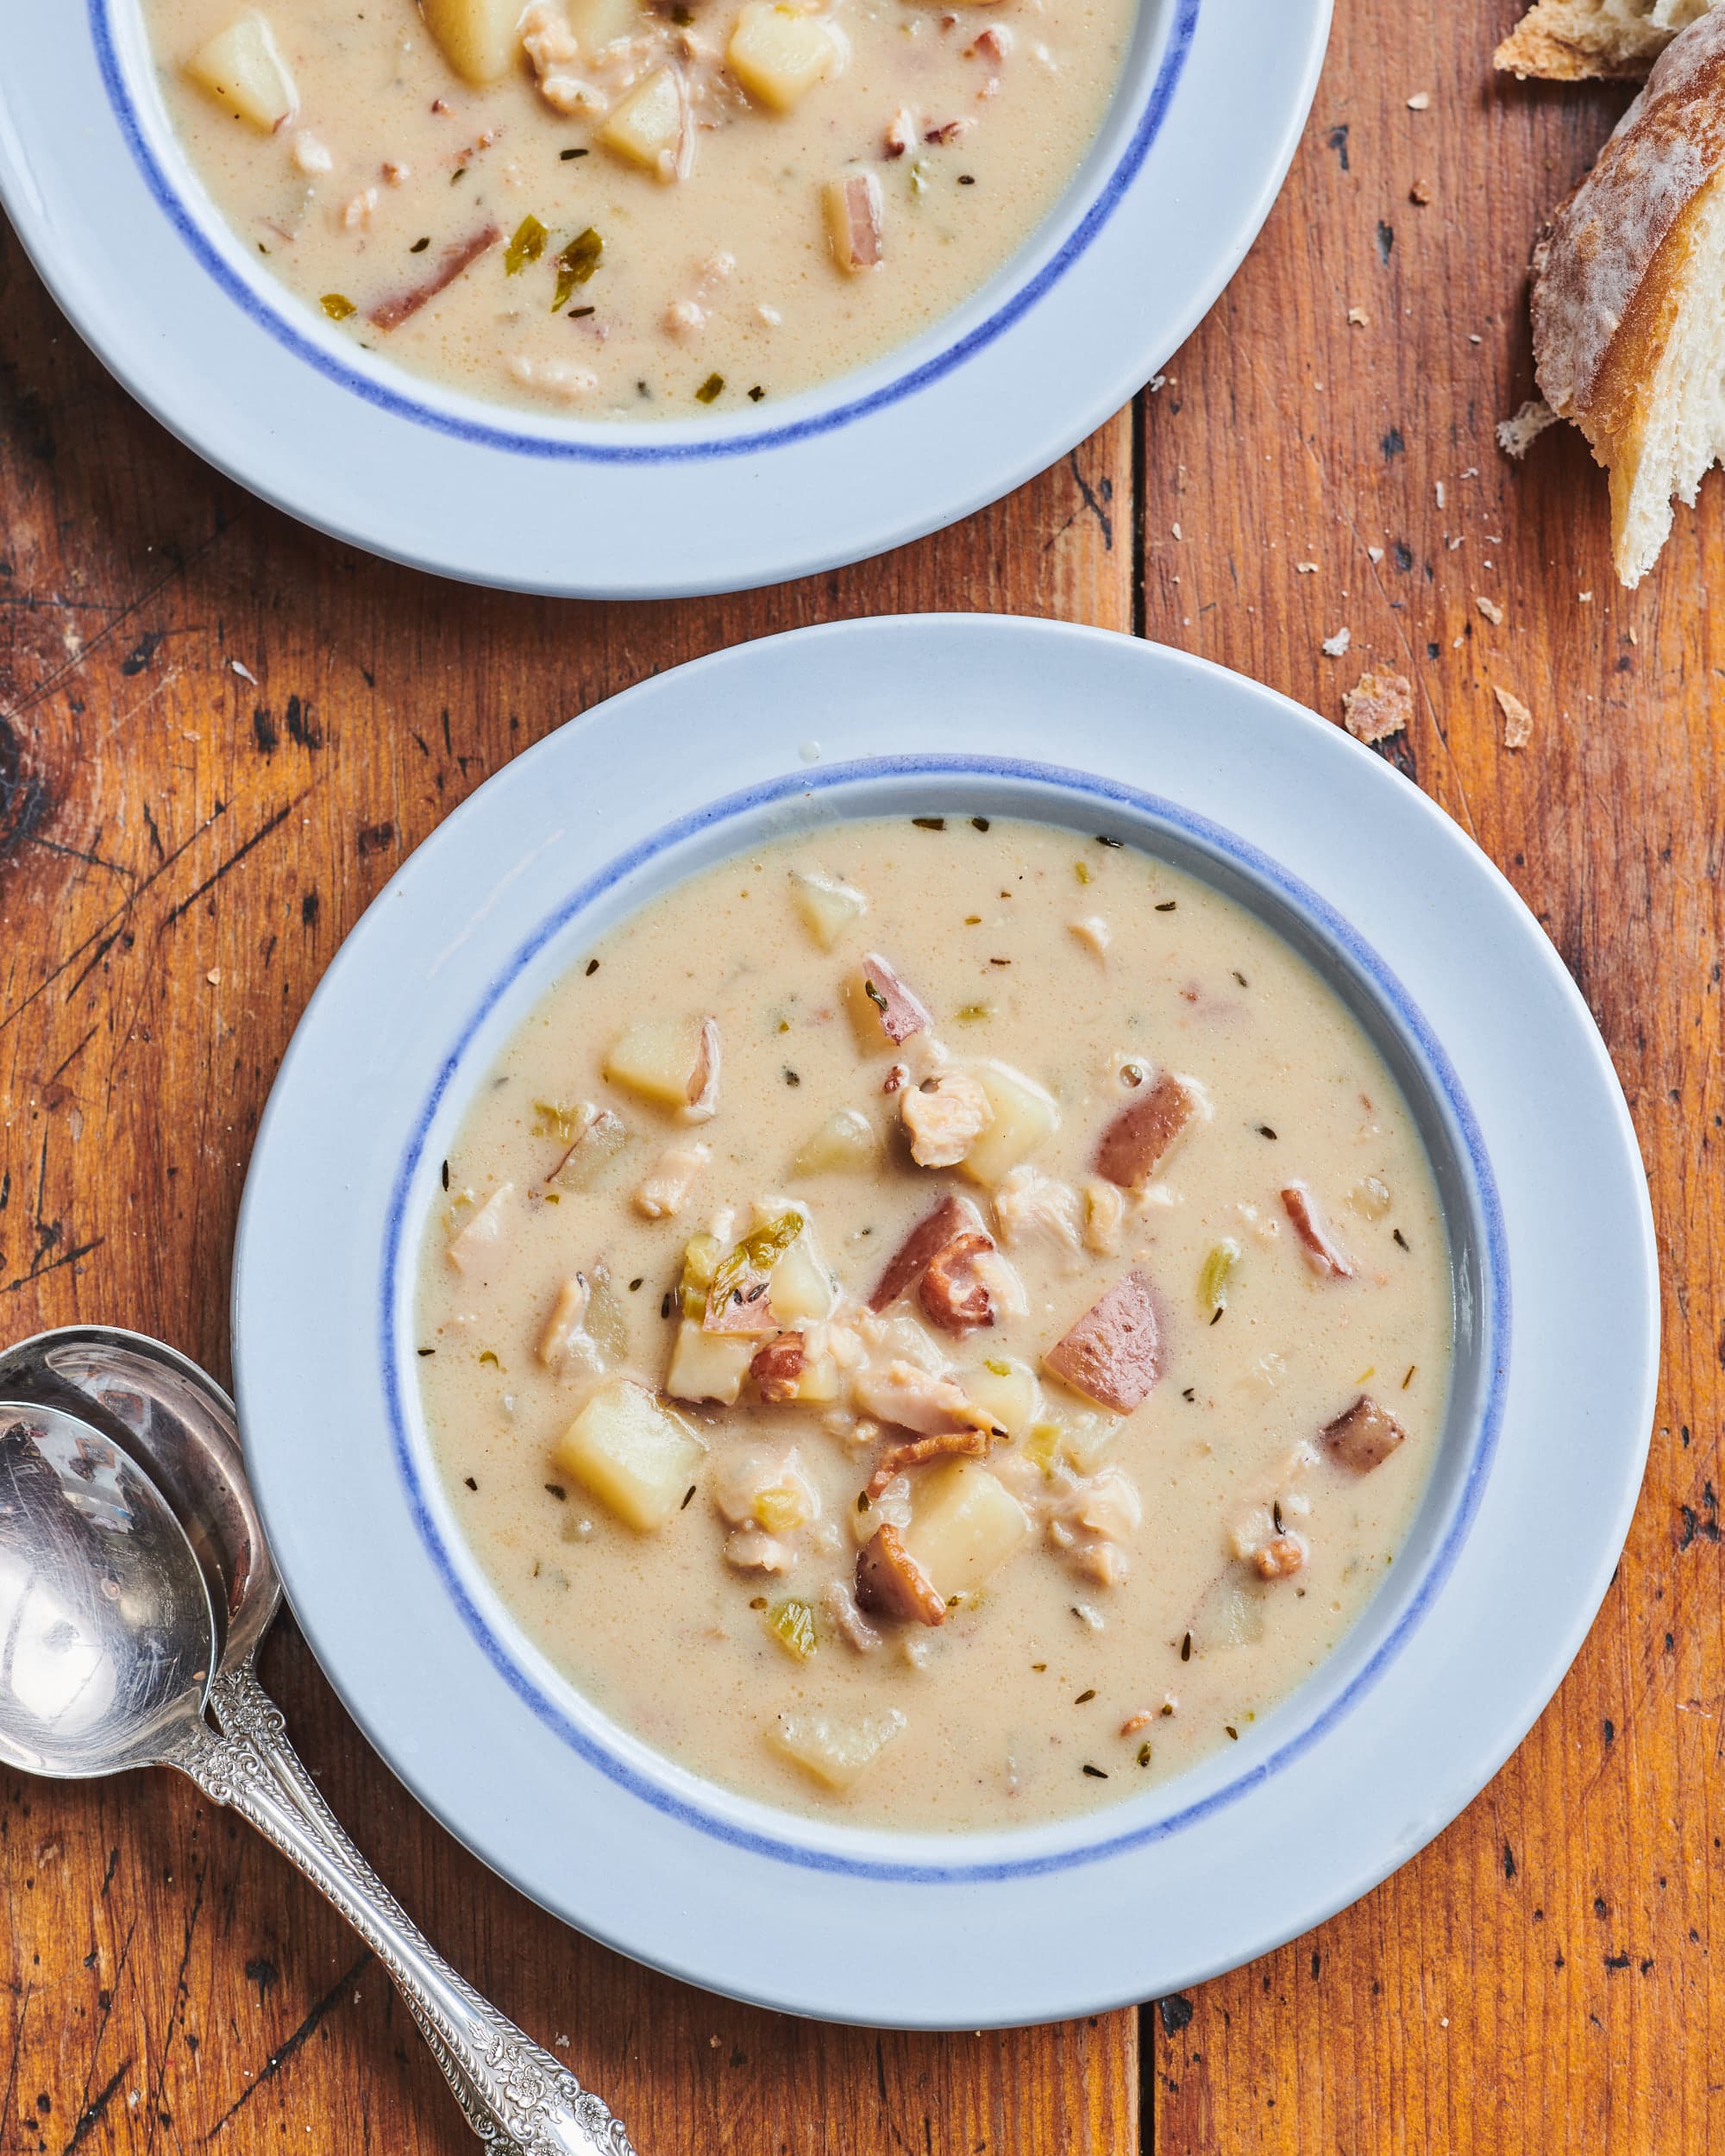 https://cdn.apartmenttherapy.info/image/upload/v1598126128/k/Photo/Recipes/2020-09-How-to-Make-Easy-New-England-Clam-Chowder/HT-Easy-New-England-Clam-Chowder807.jpg